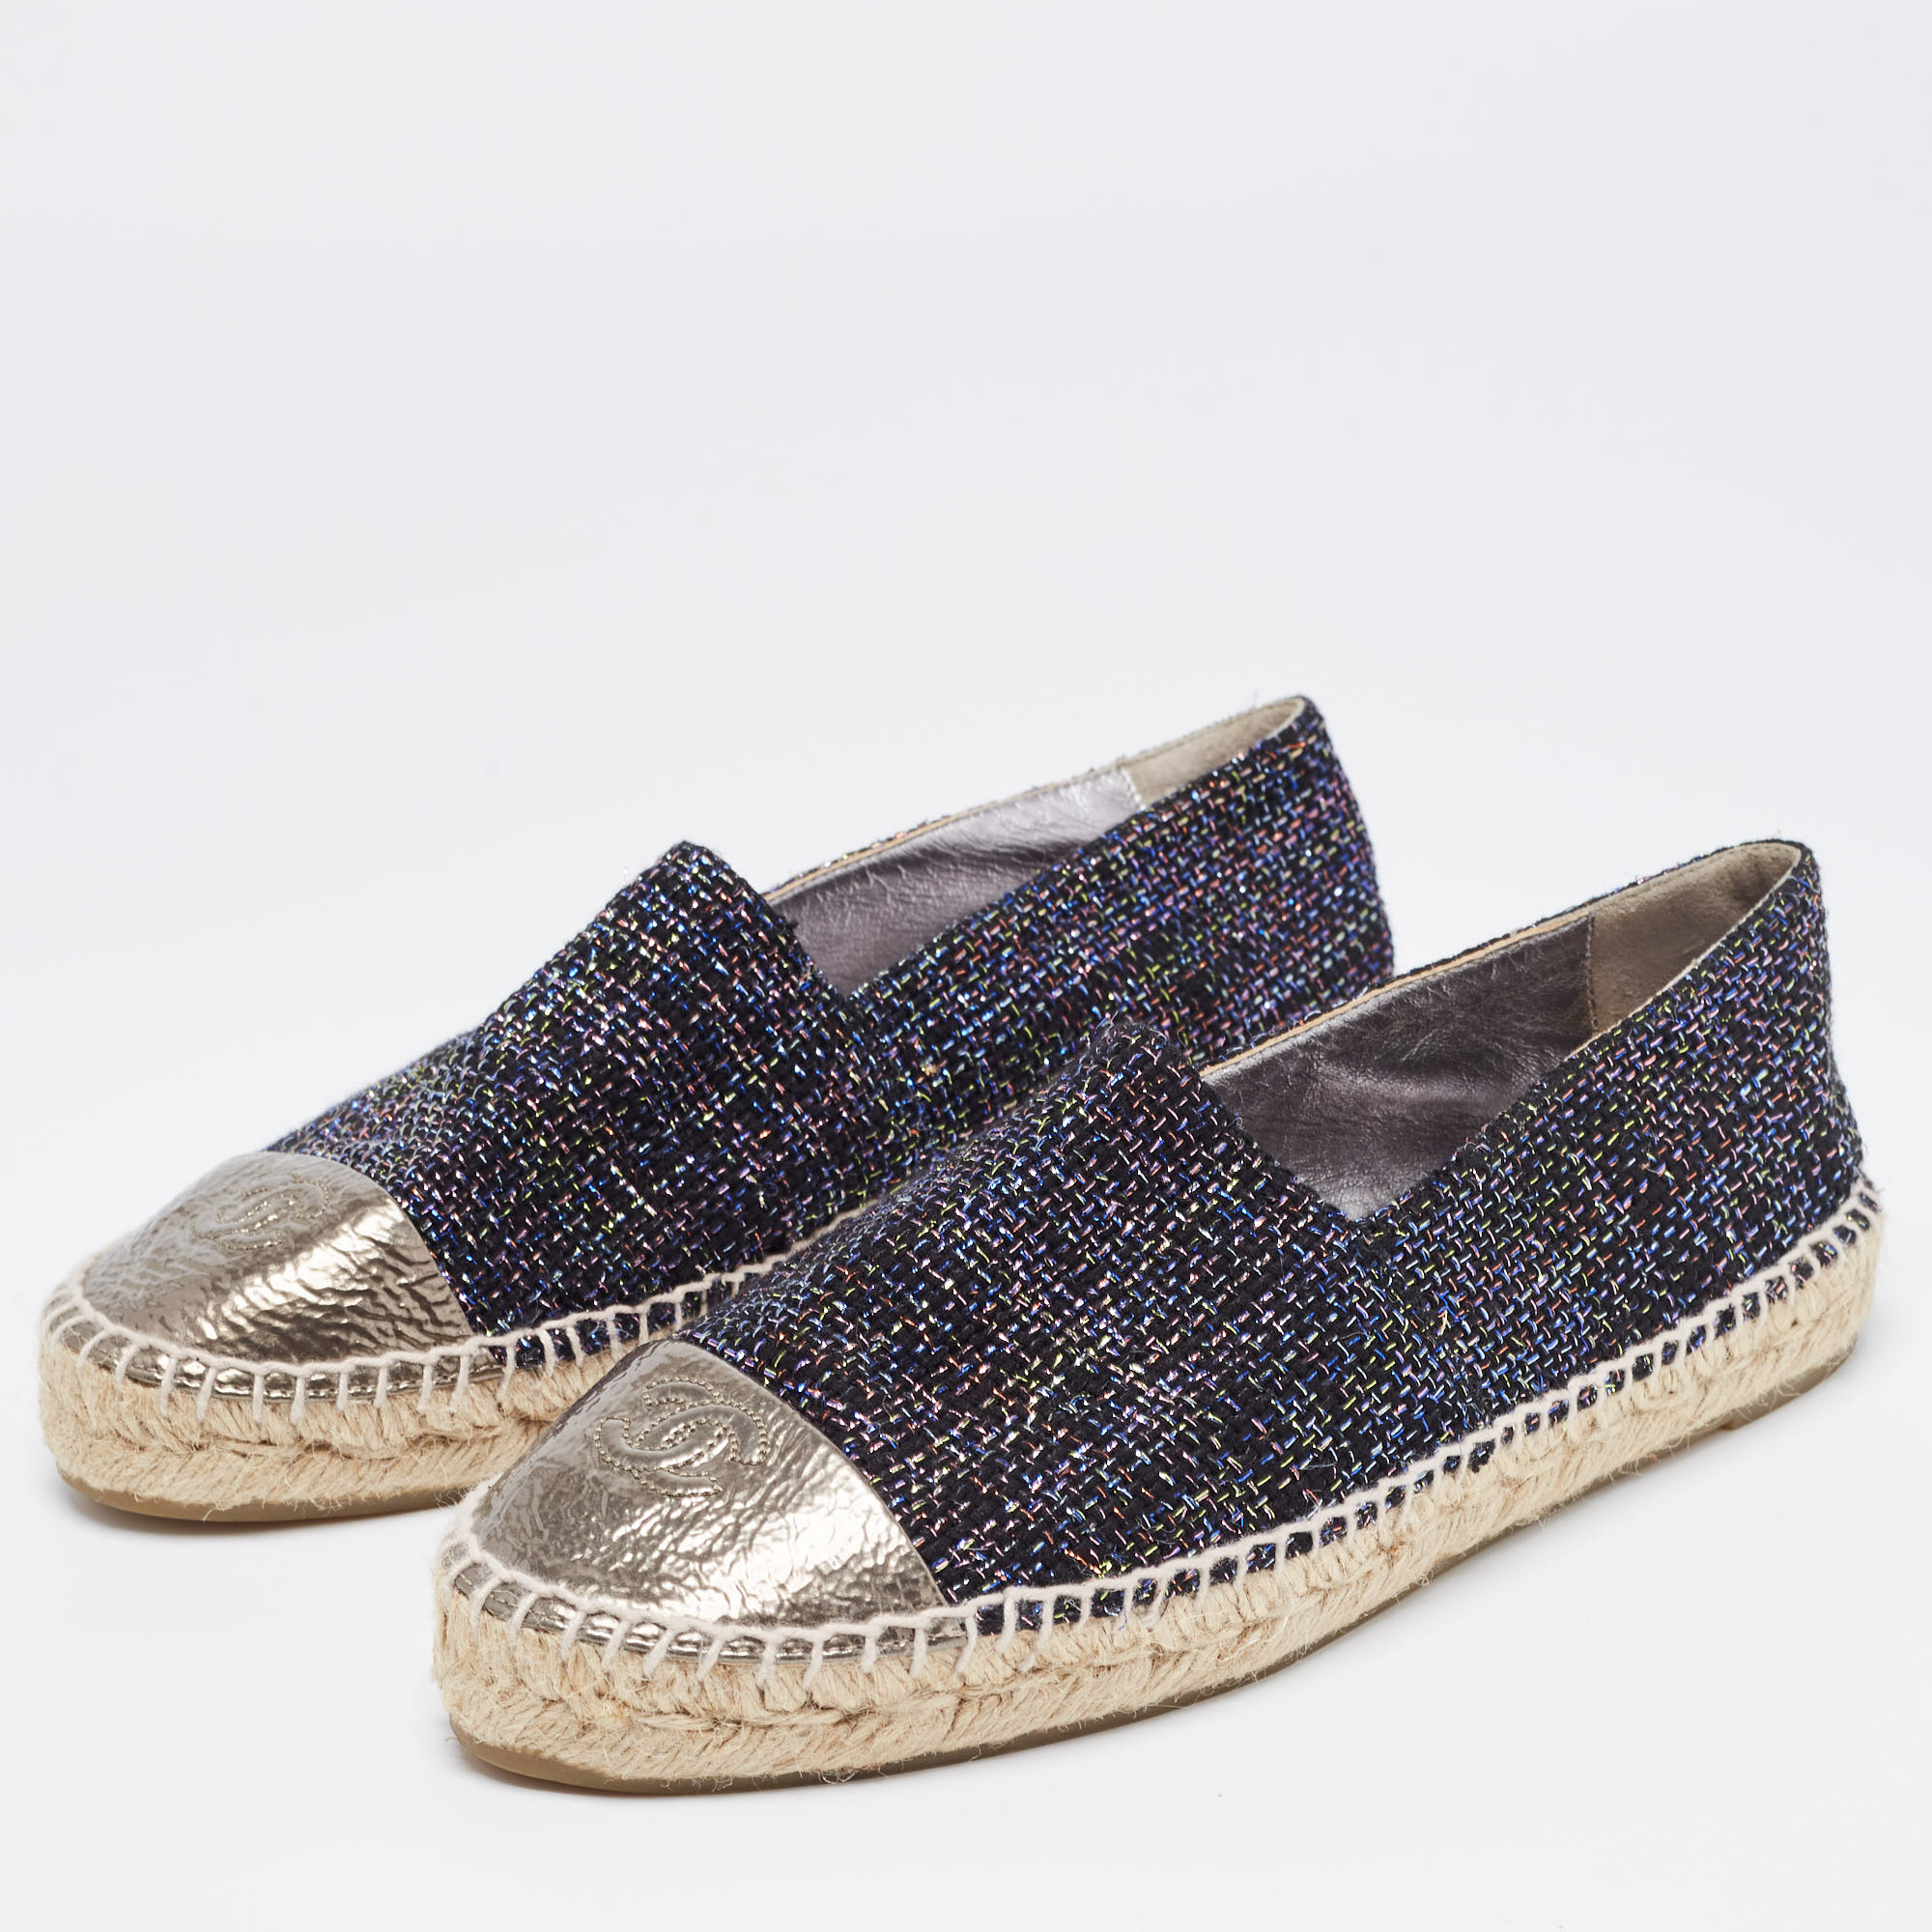 

Chanel Metallic Tweed and Leather Cap Toe CC Espadrille Flats Size